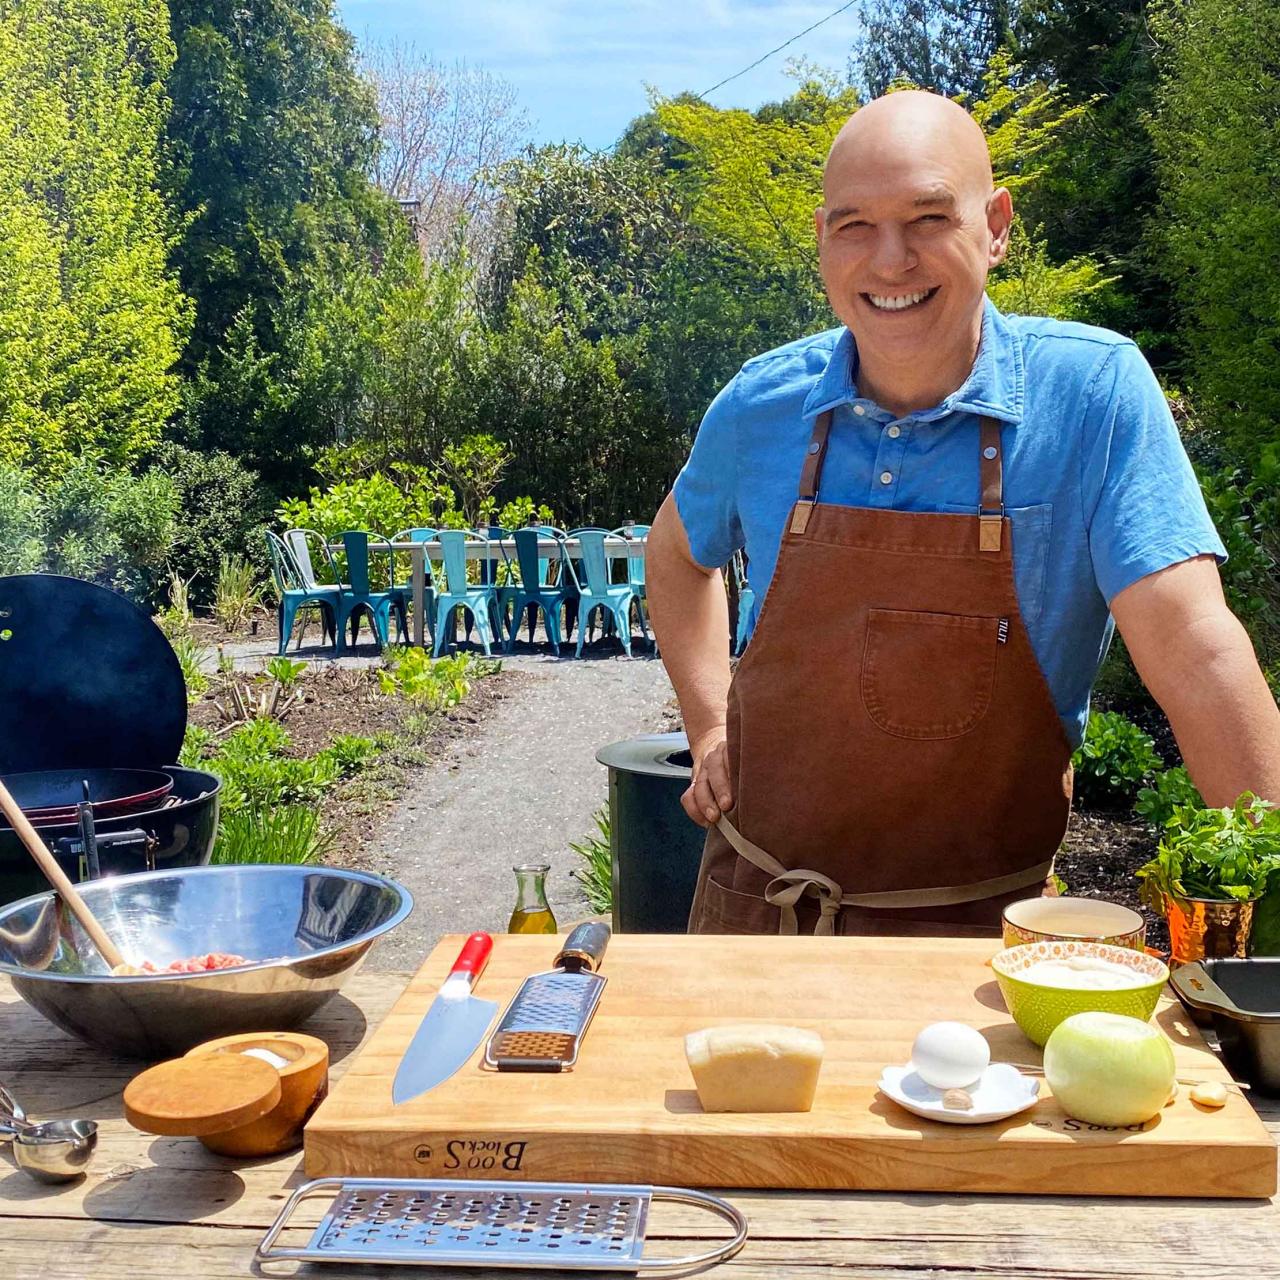 This Bench Scraper Is Chef Michael Symon's 'Greatest' Kitchen Tool